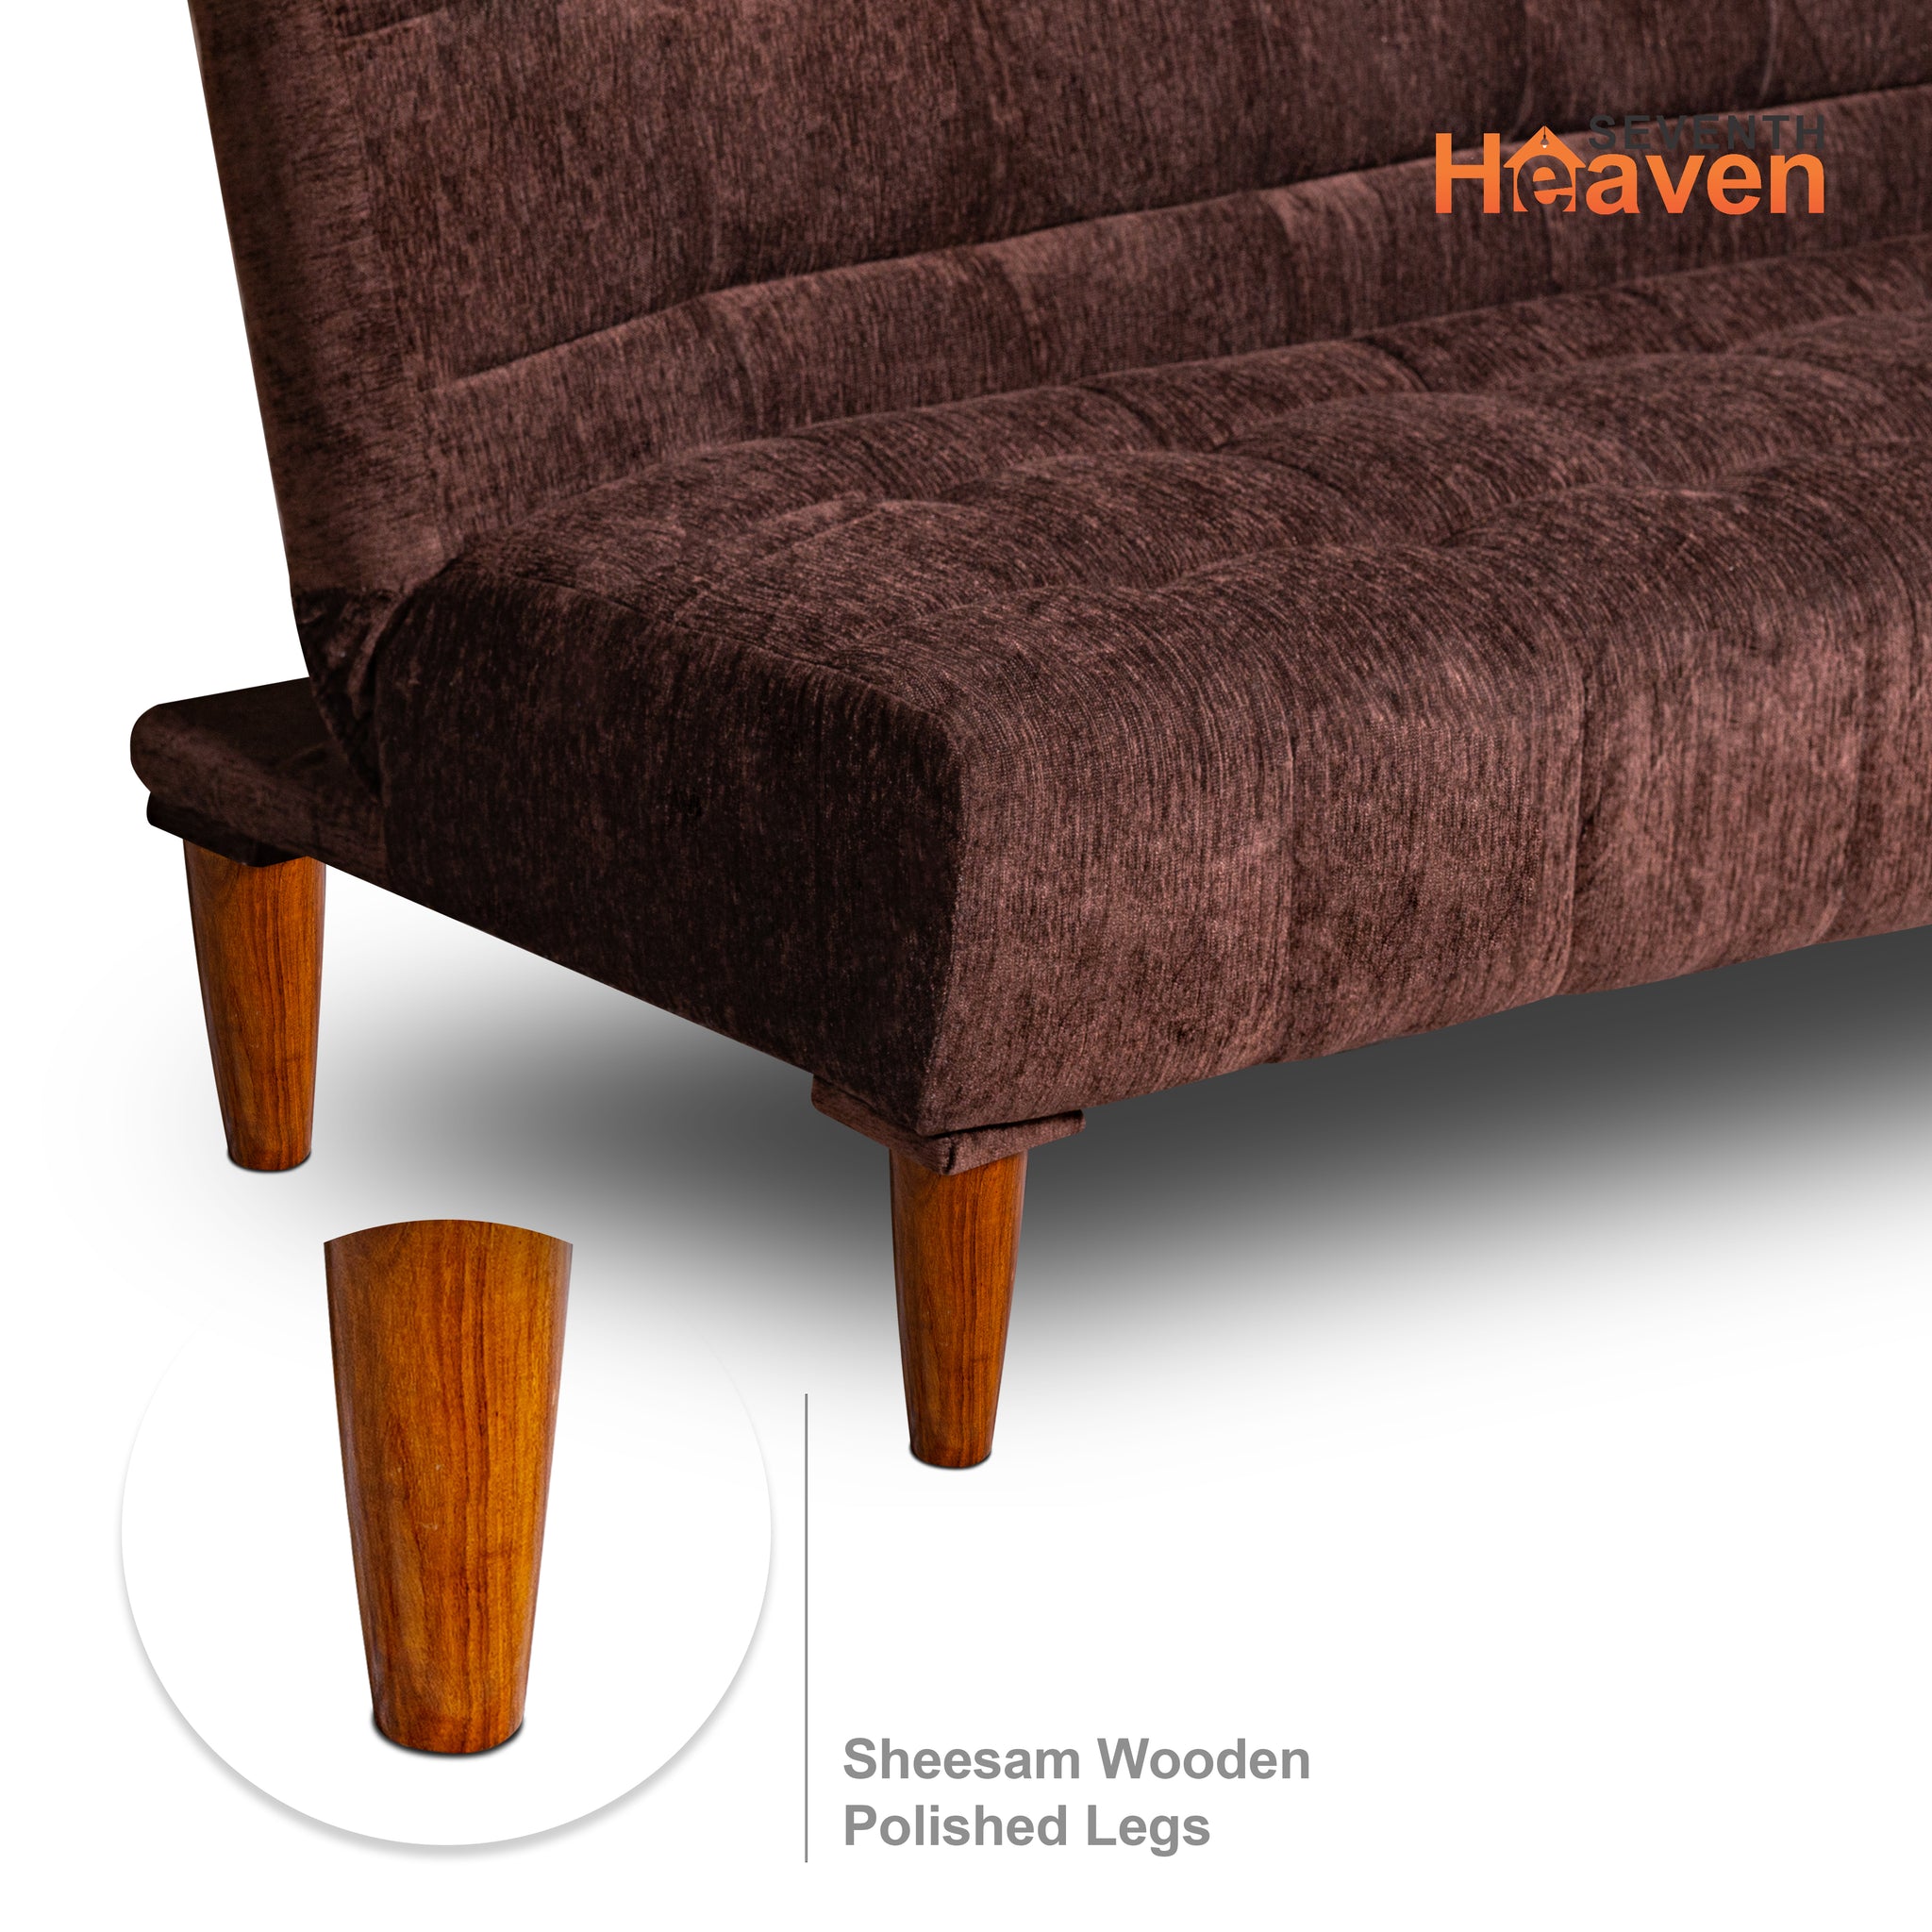 Seventh Heaven Florida Neo 4 Seater Wooden Sofa Cum Bed Modern & Elegant Smart Furniture Range for luxurious homes, living rooms and offices. Use as a sofa, lounger or bed. Perfect for guests. Molphino fabric with sheesham polished wooden legs. Brown colour.